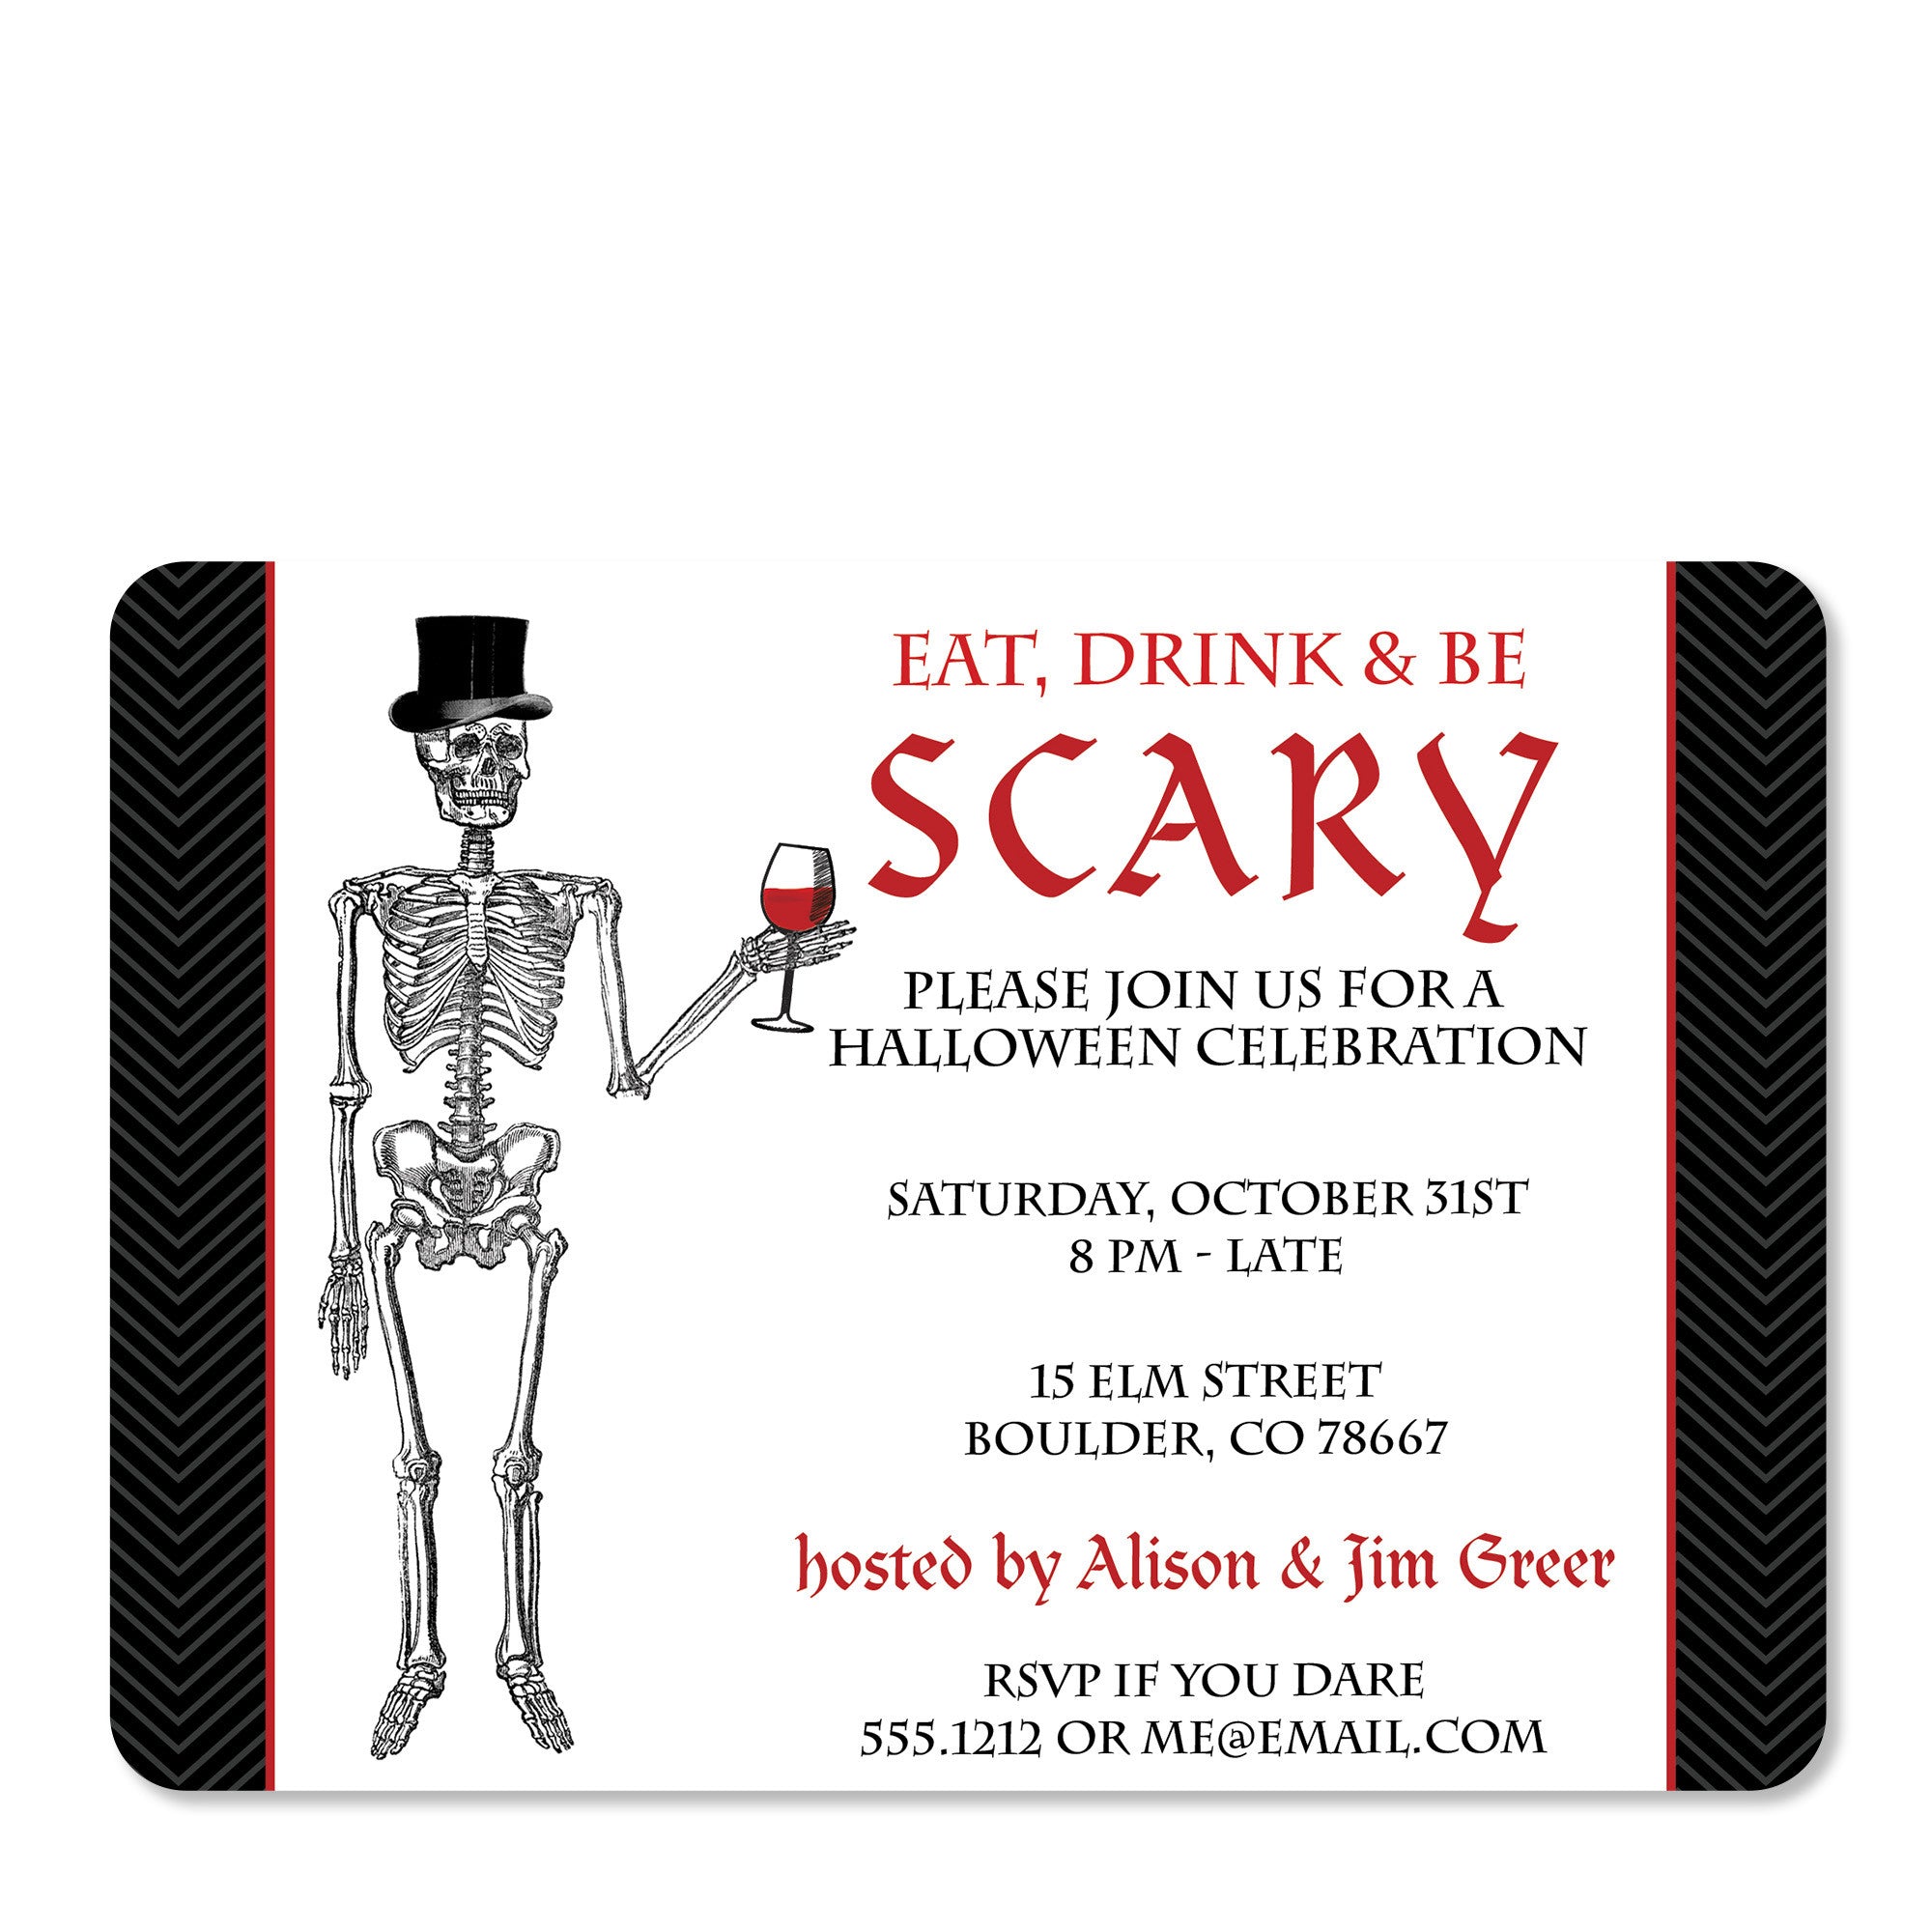 Eat, Drink And Be Scary Halloween Invitation (Printed)